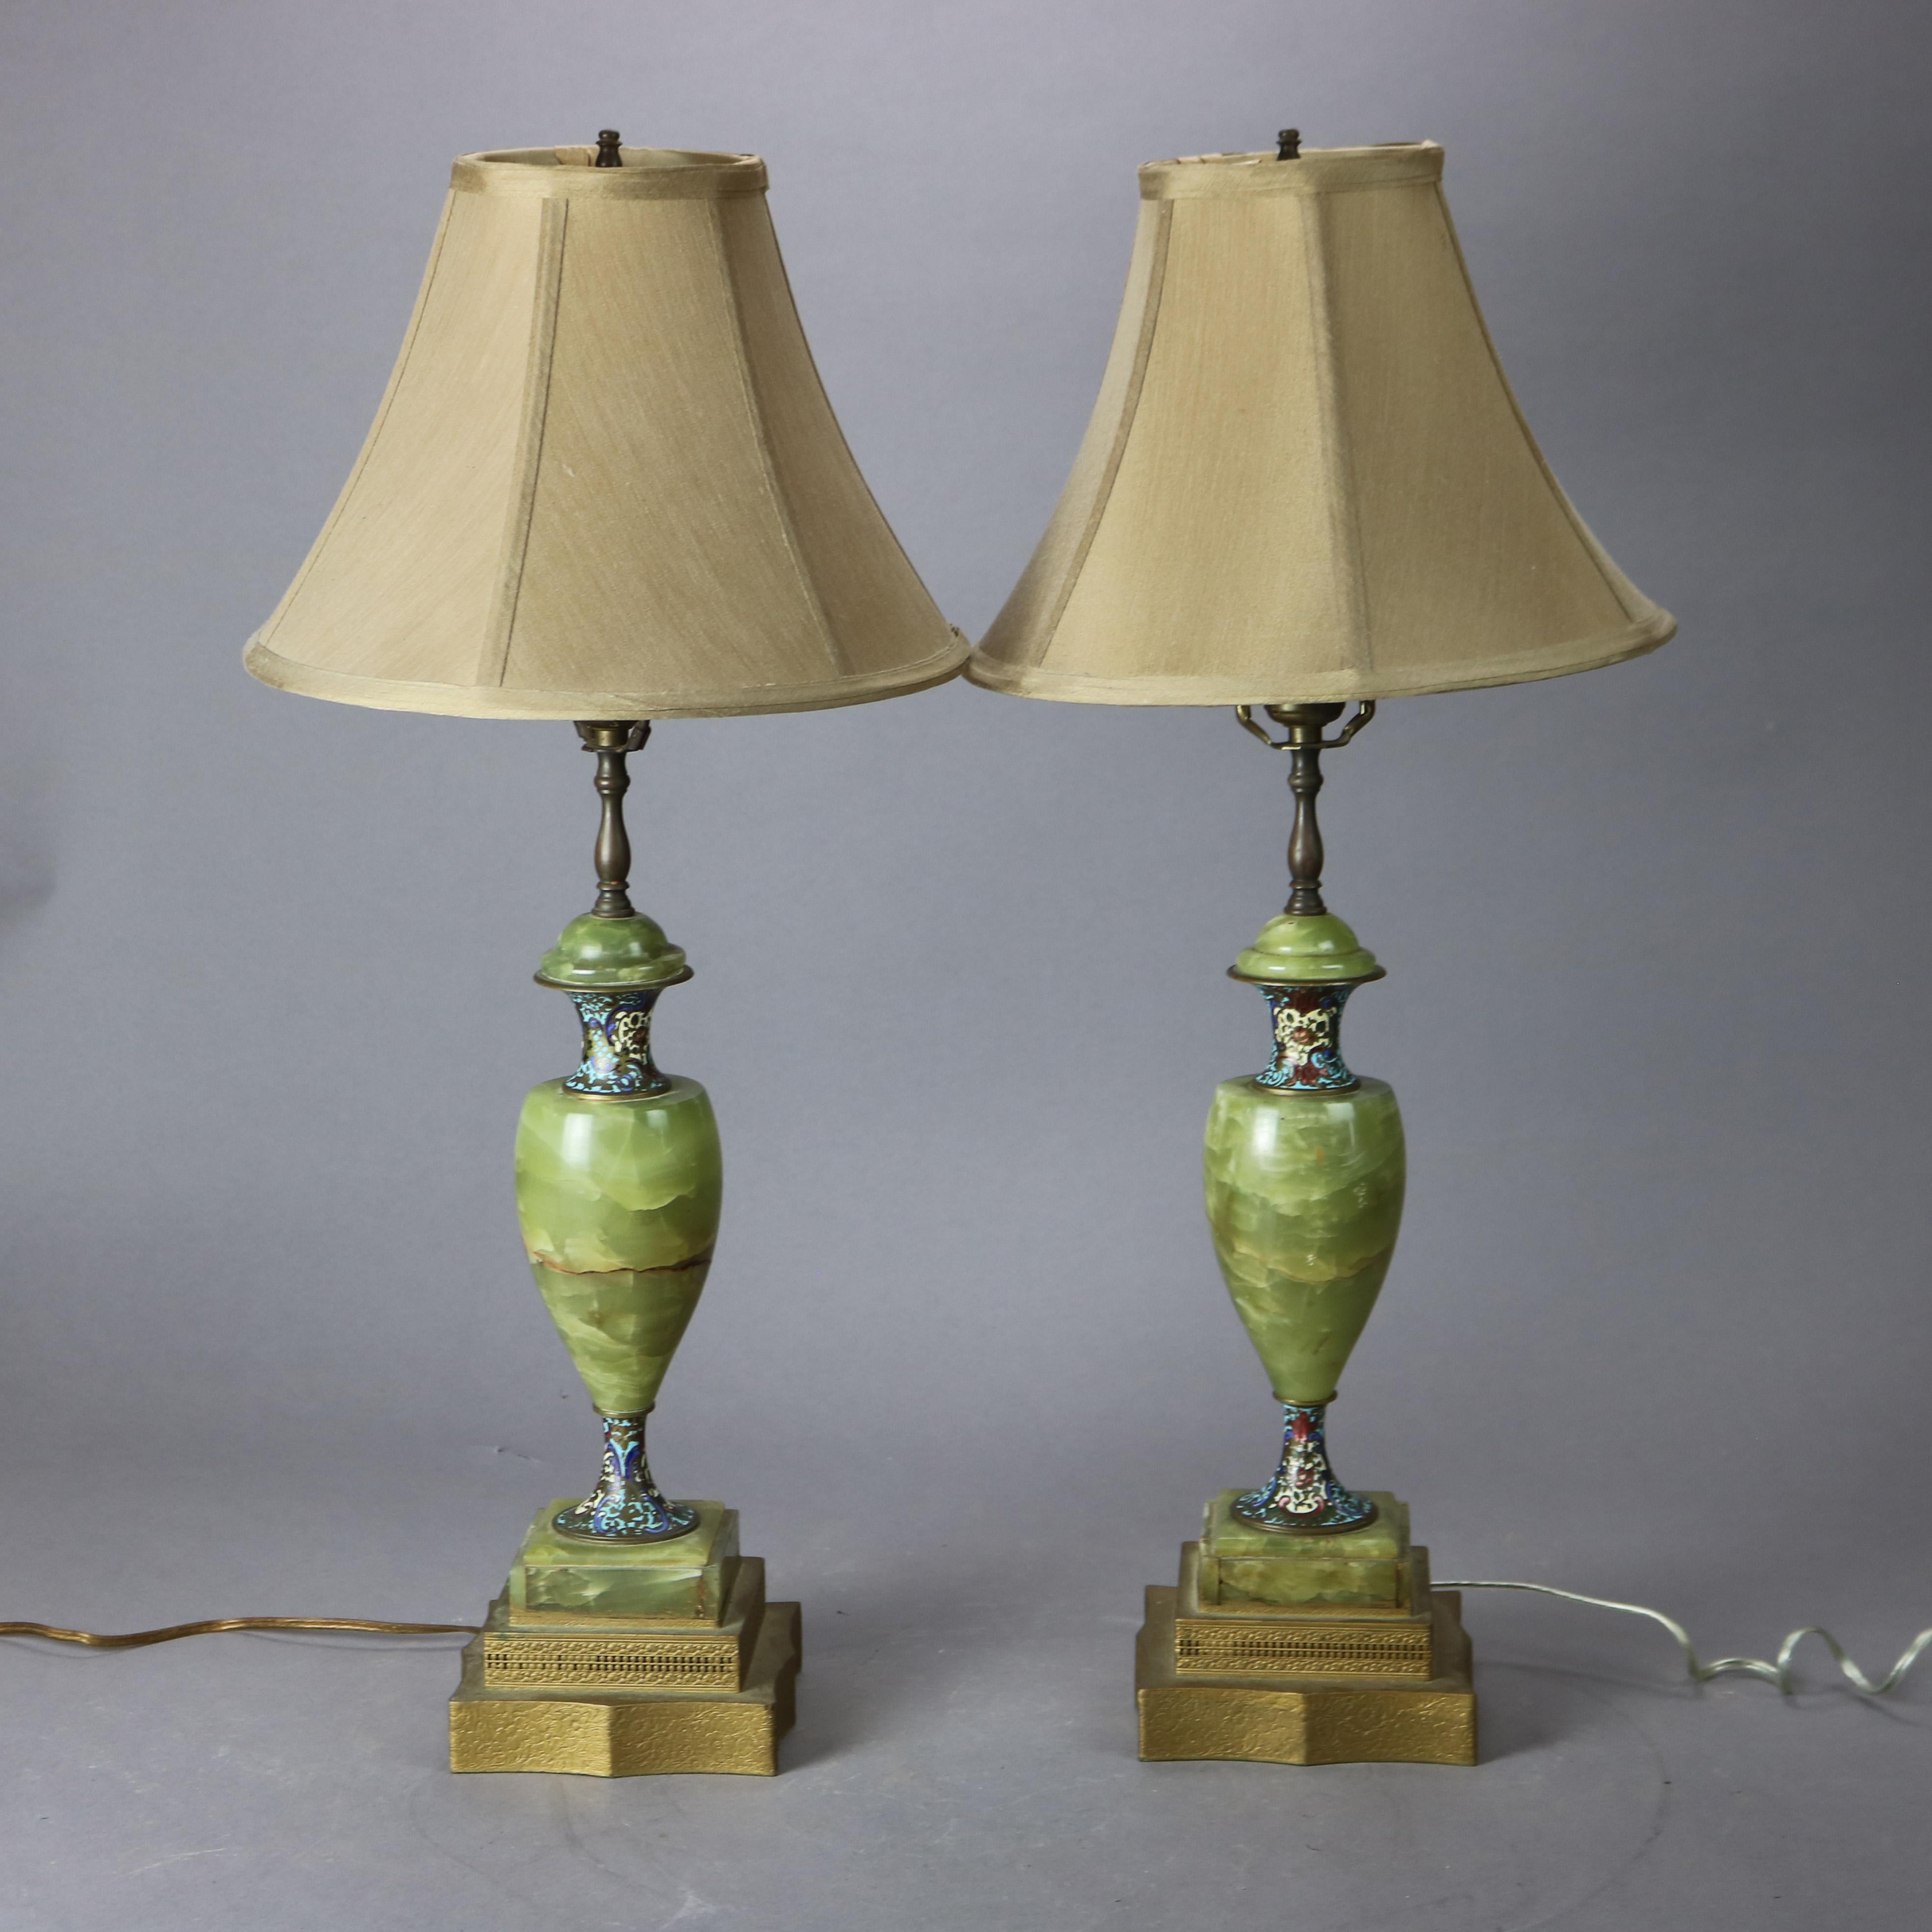 American Antique Pair of Onyx & Champlevé Table Lamps, circa 1920